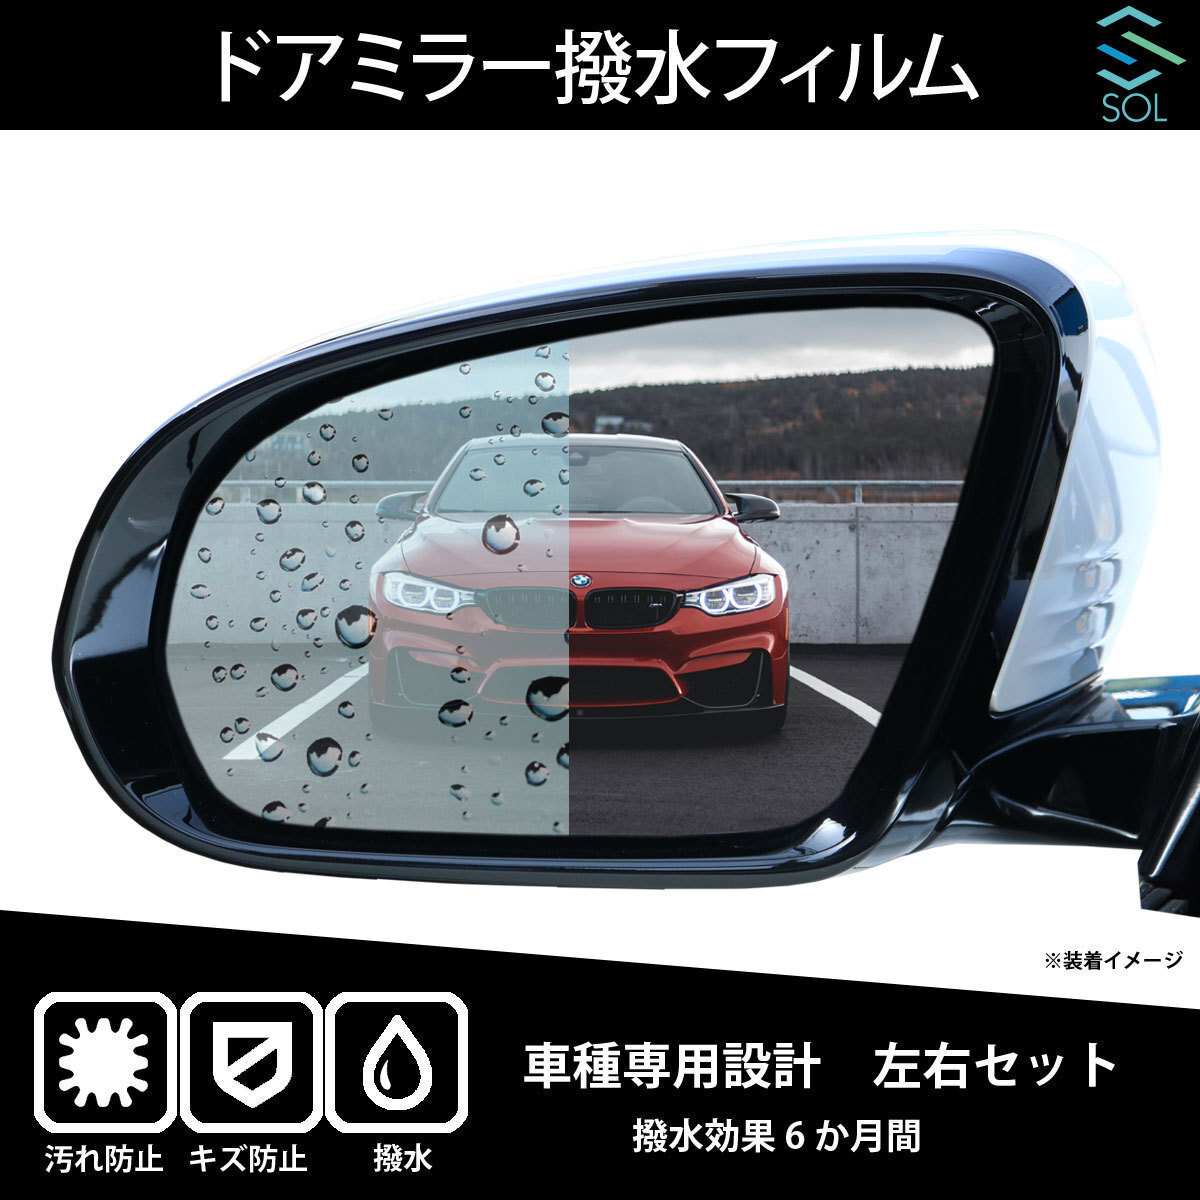  postage 185 jpy car make exclusive use Benz X164( latter term ) exclusive use water-repellent door mirror film left right set water-repellent effect 6 months shipping deadline 18 hour 